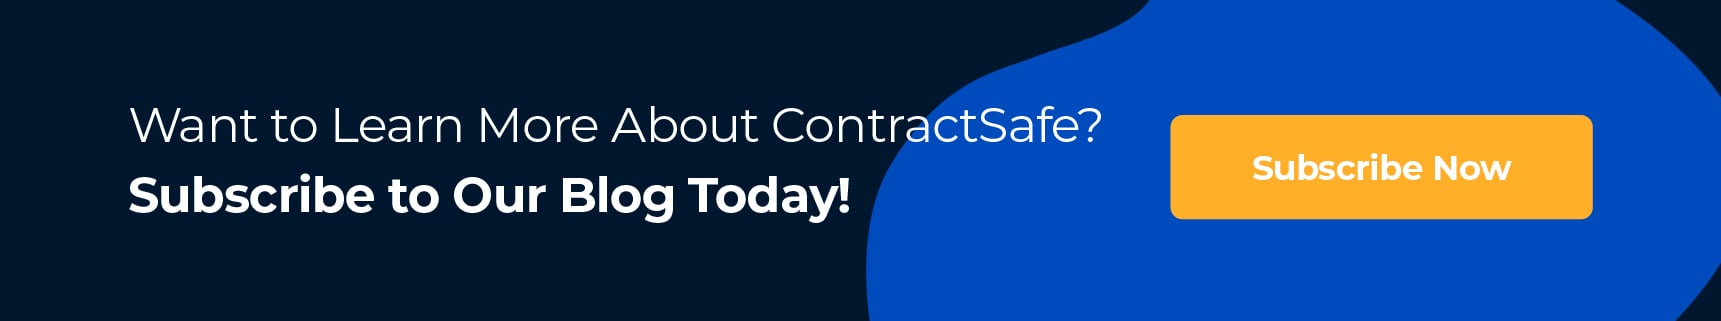 Want to Learn More About ContractSafe? Subscribe to Our Blog Today!